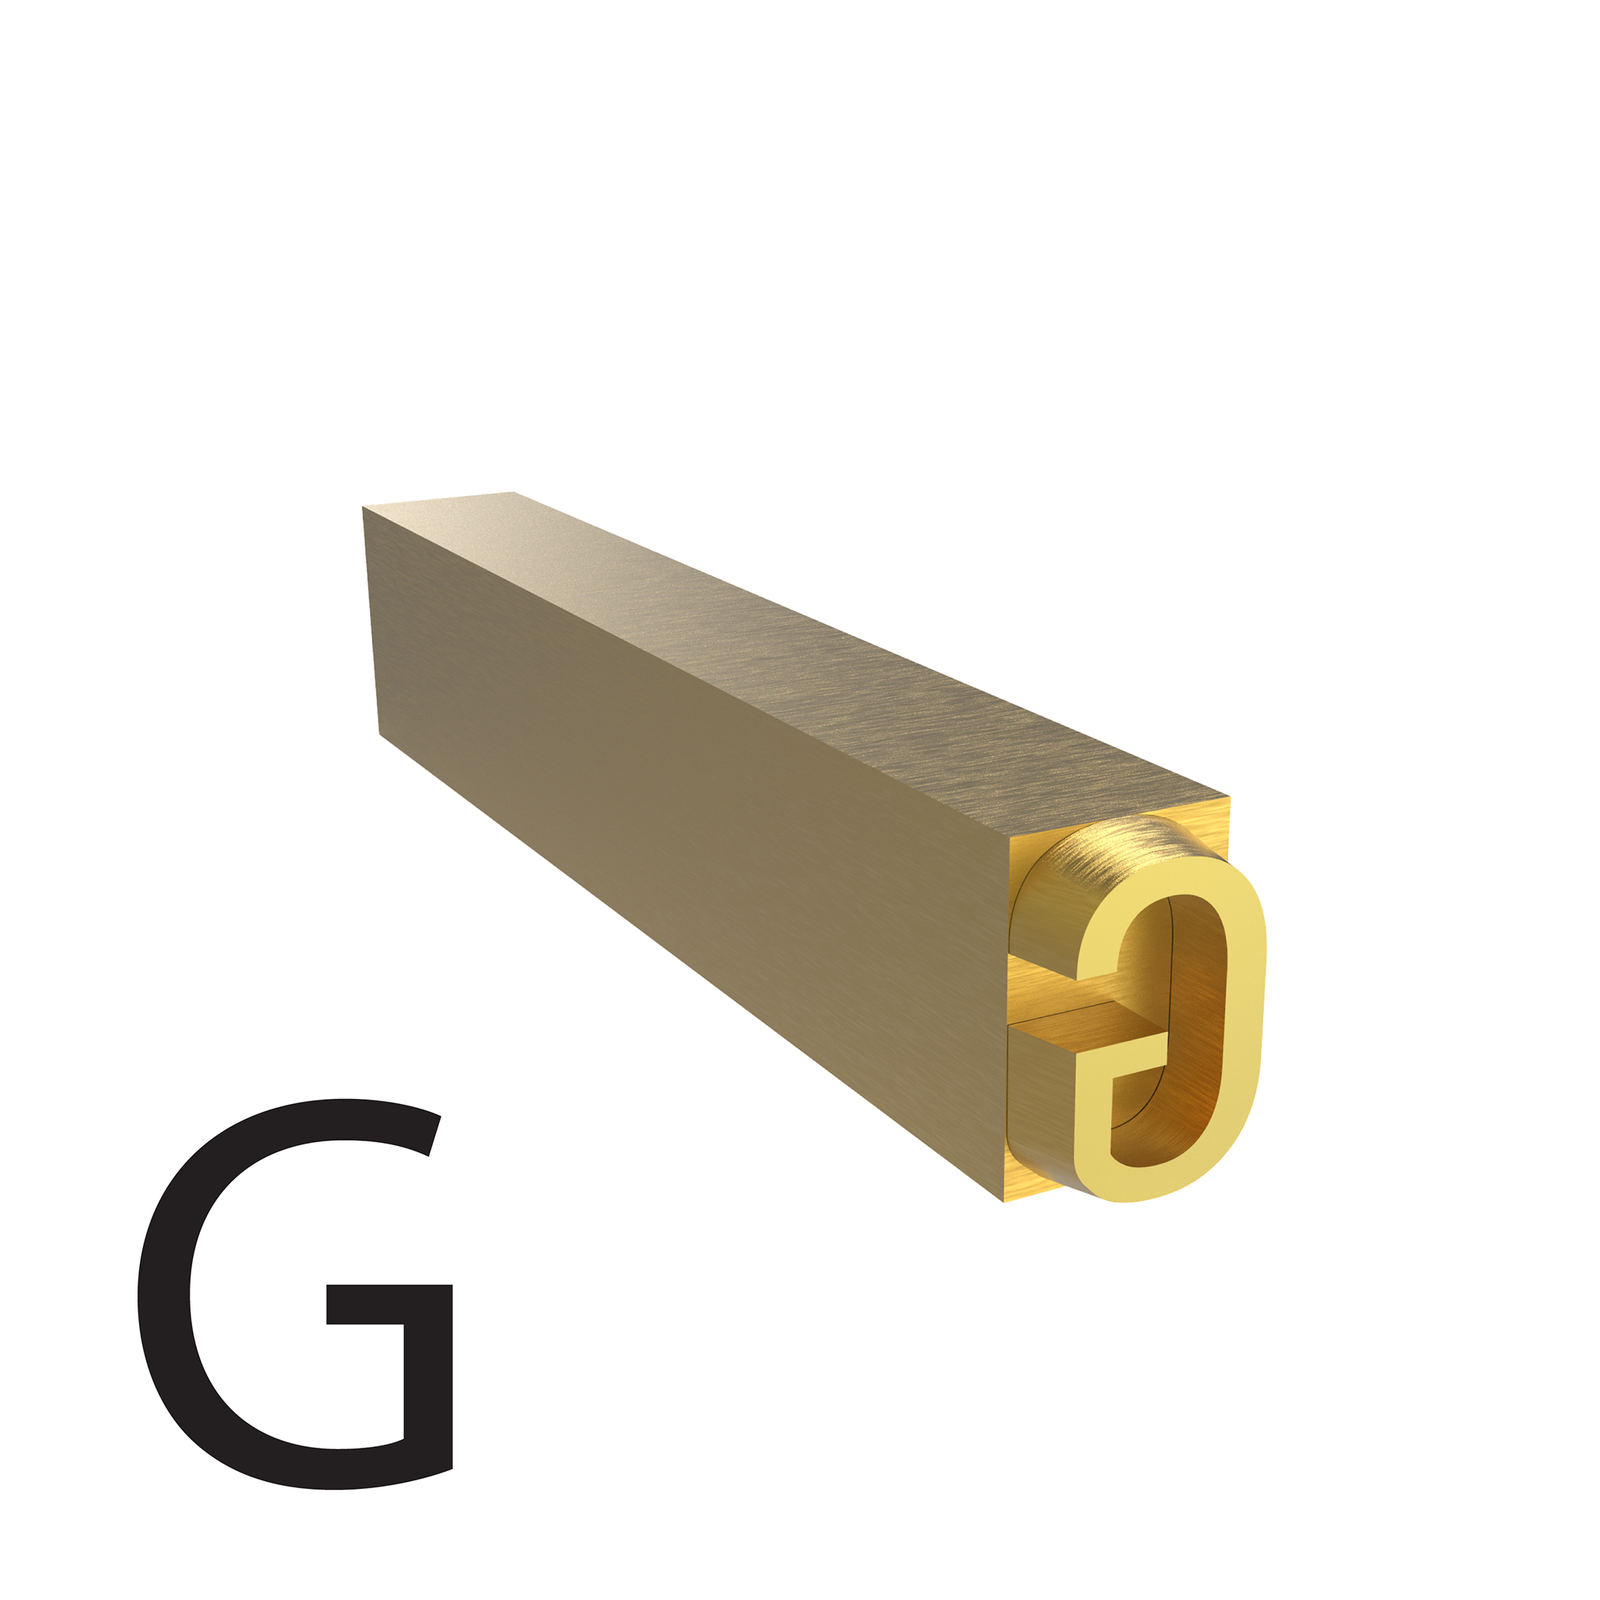 4mm hot stamp letter G type used for coders and printers